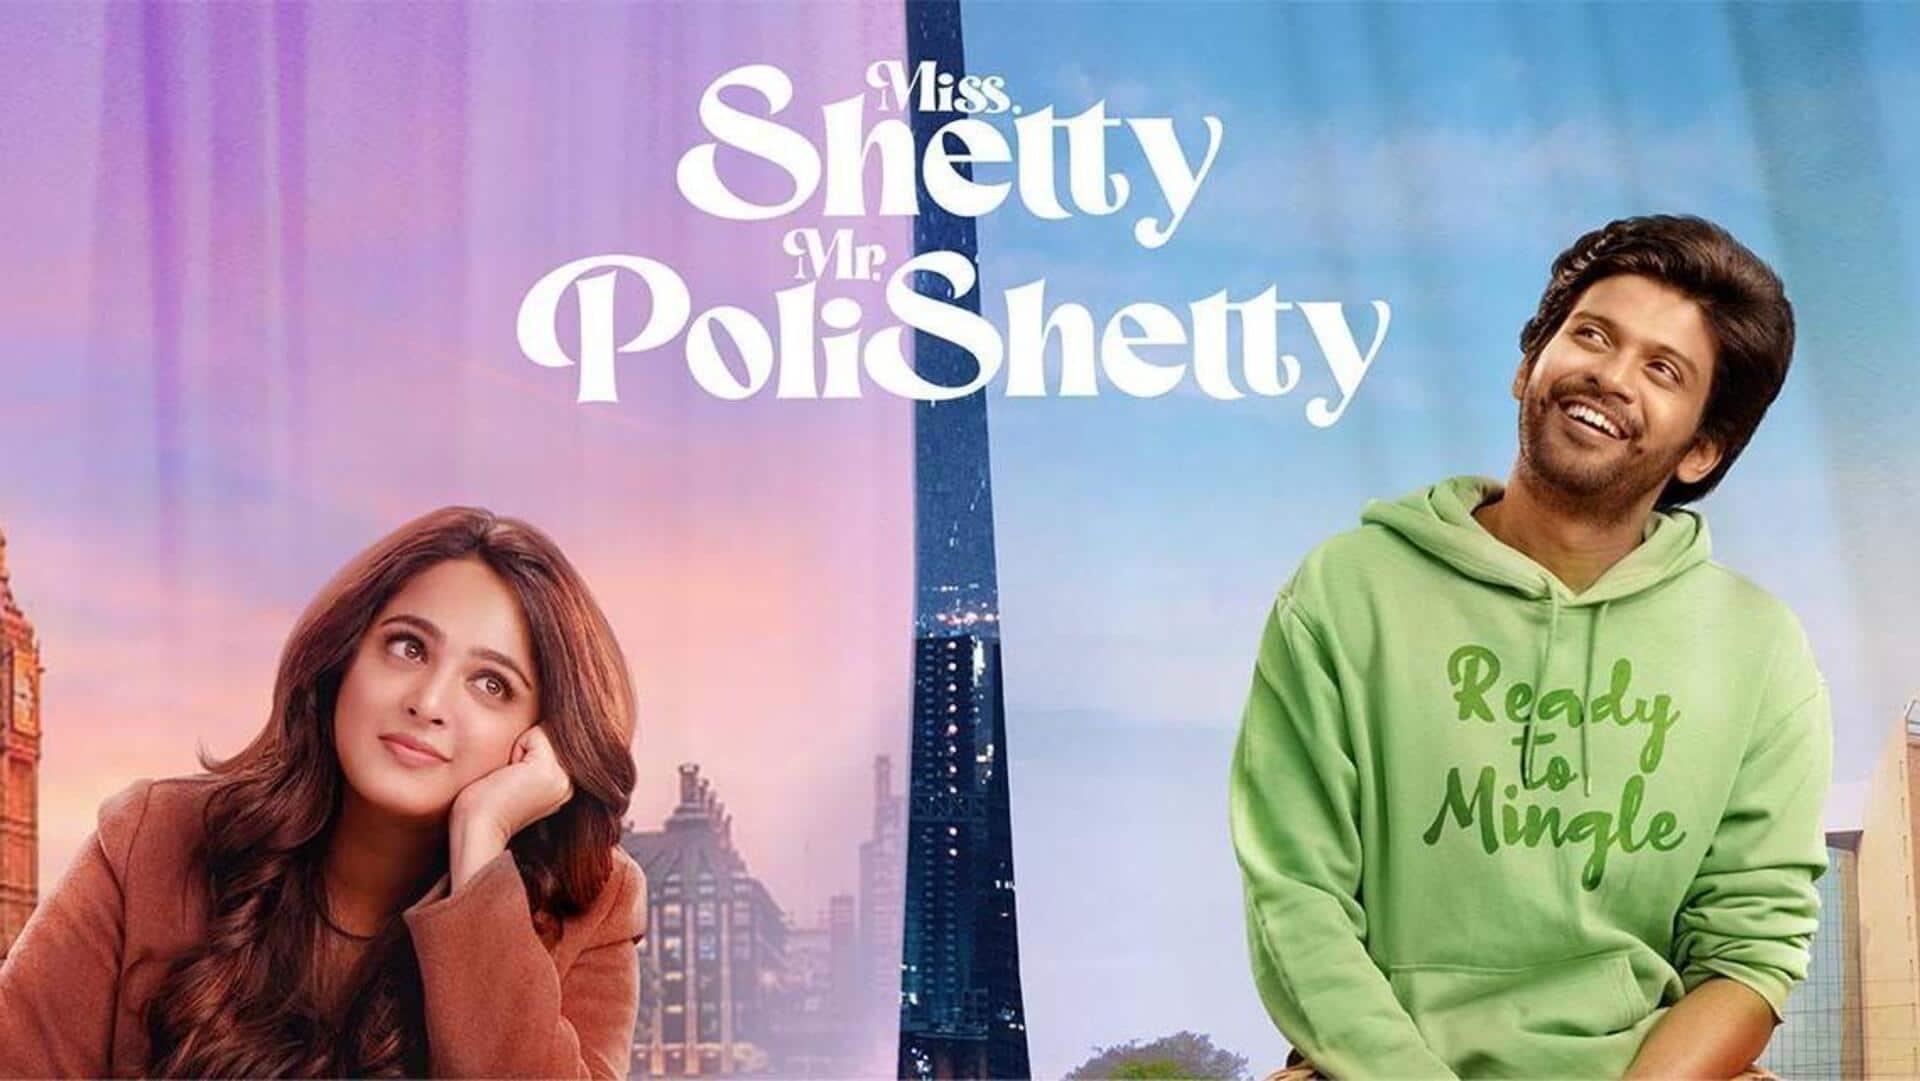 Box office collection: 'Miss Shetty Mr. Polishetty' is steady